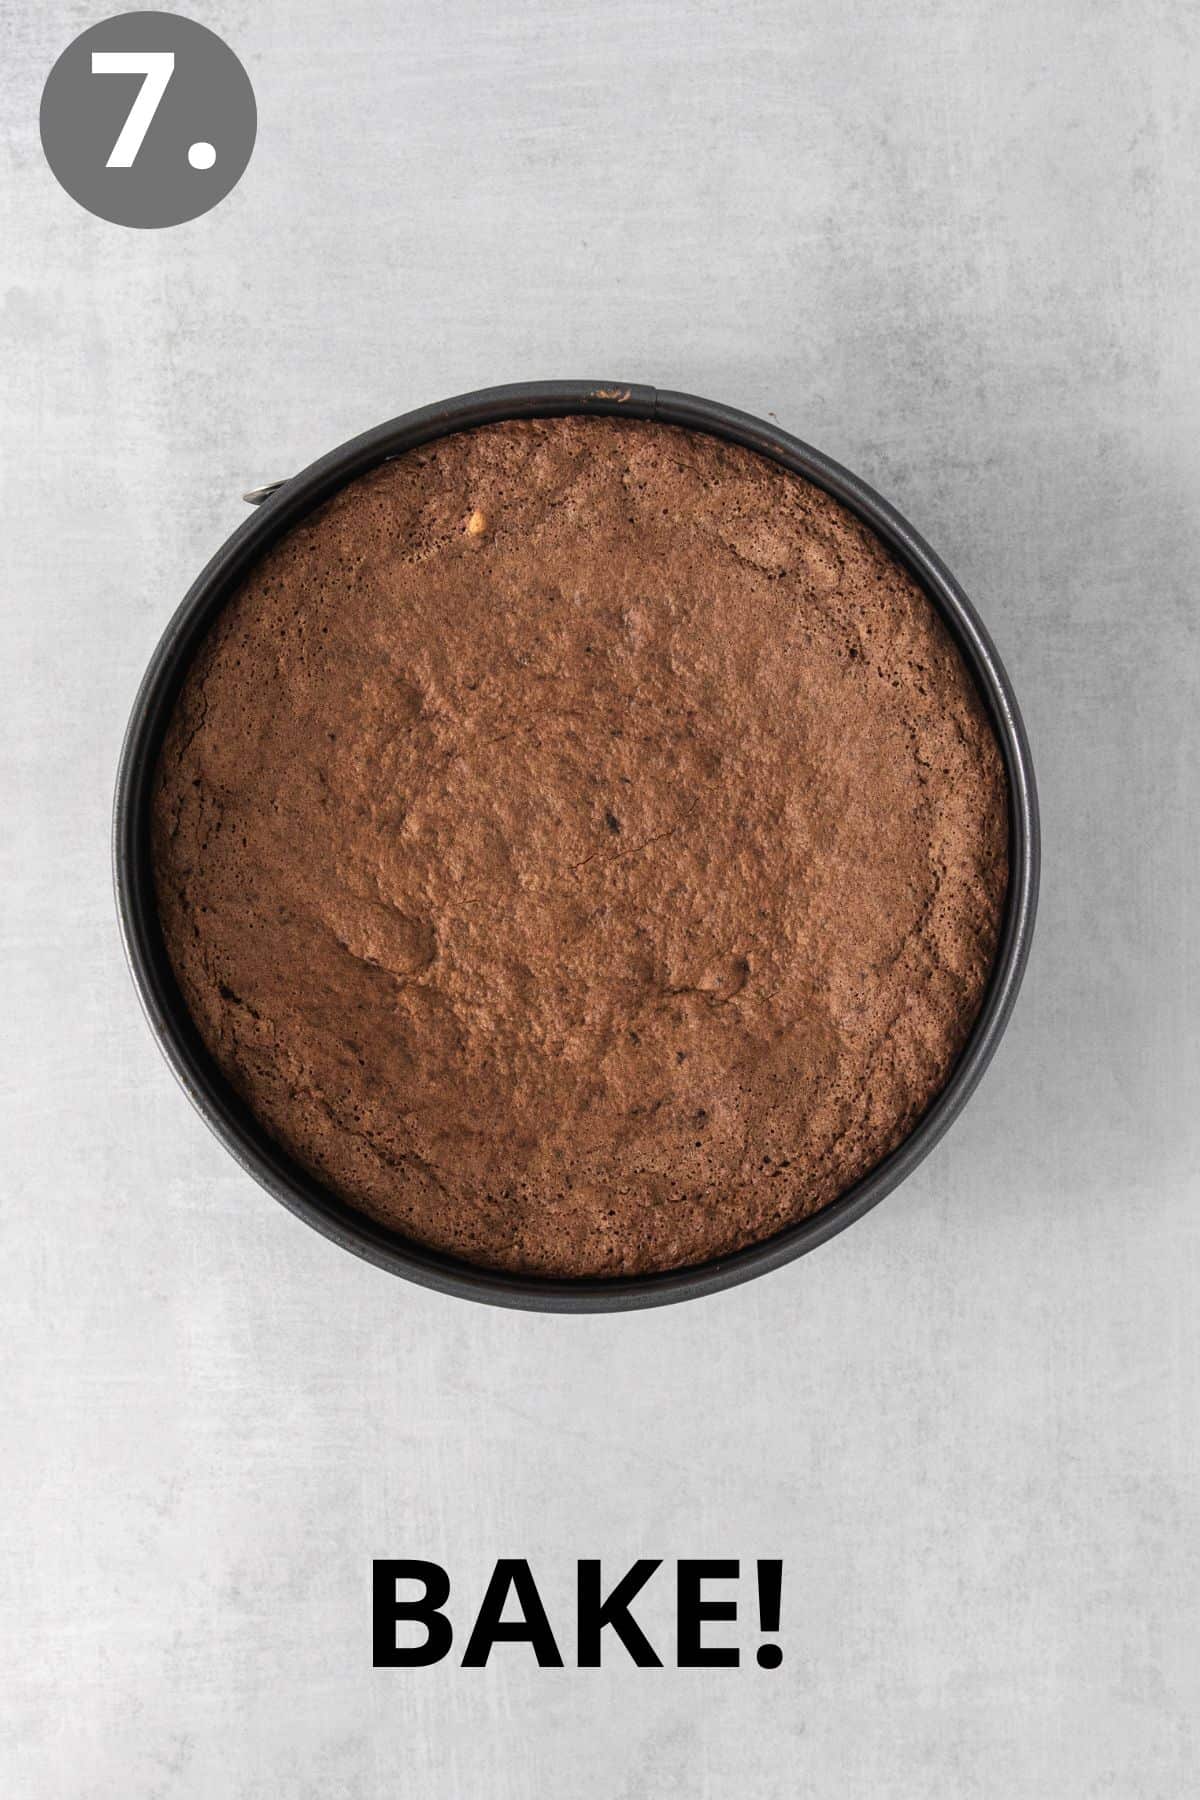 Baked fourless chocolate torte in a round cake pan